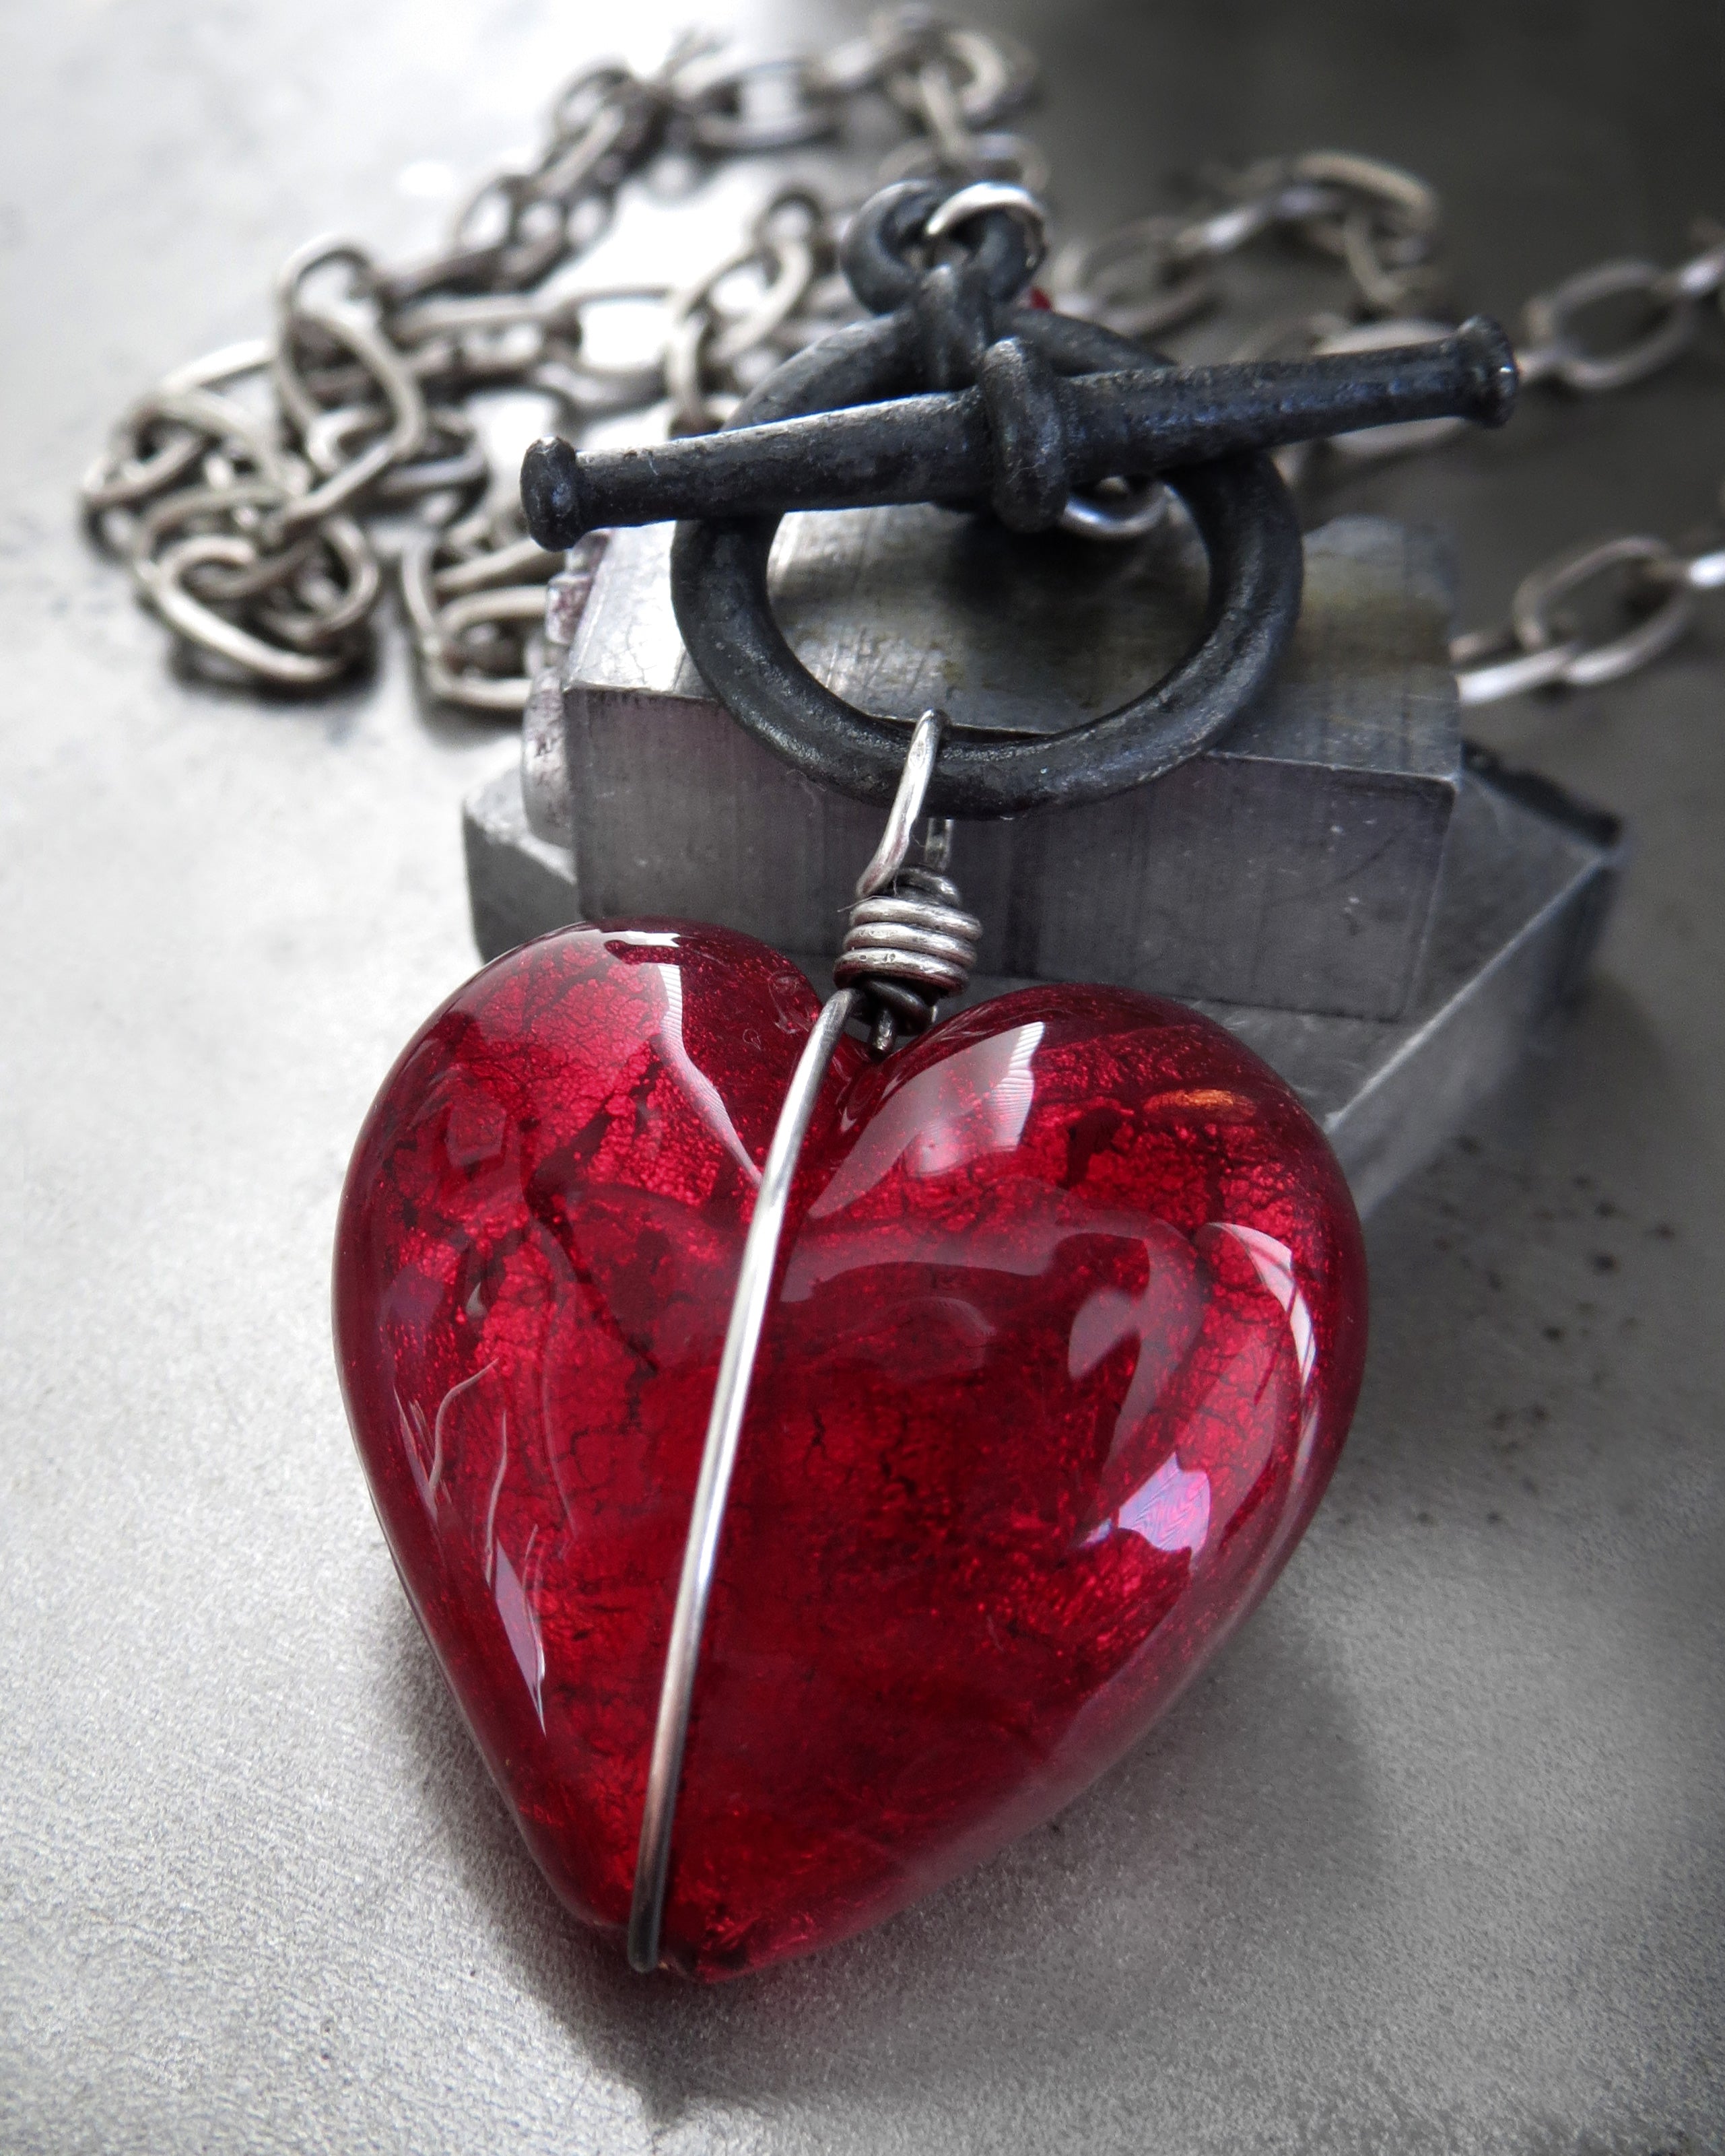 Ver 10. HEART of DARKNESS - Deep Red Heart Pendant Necklace